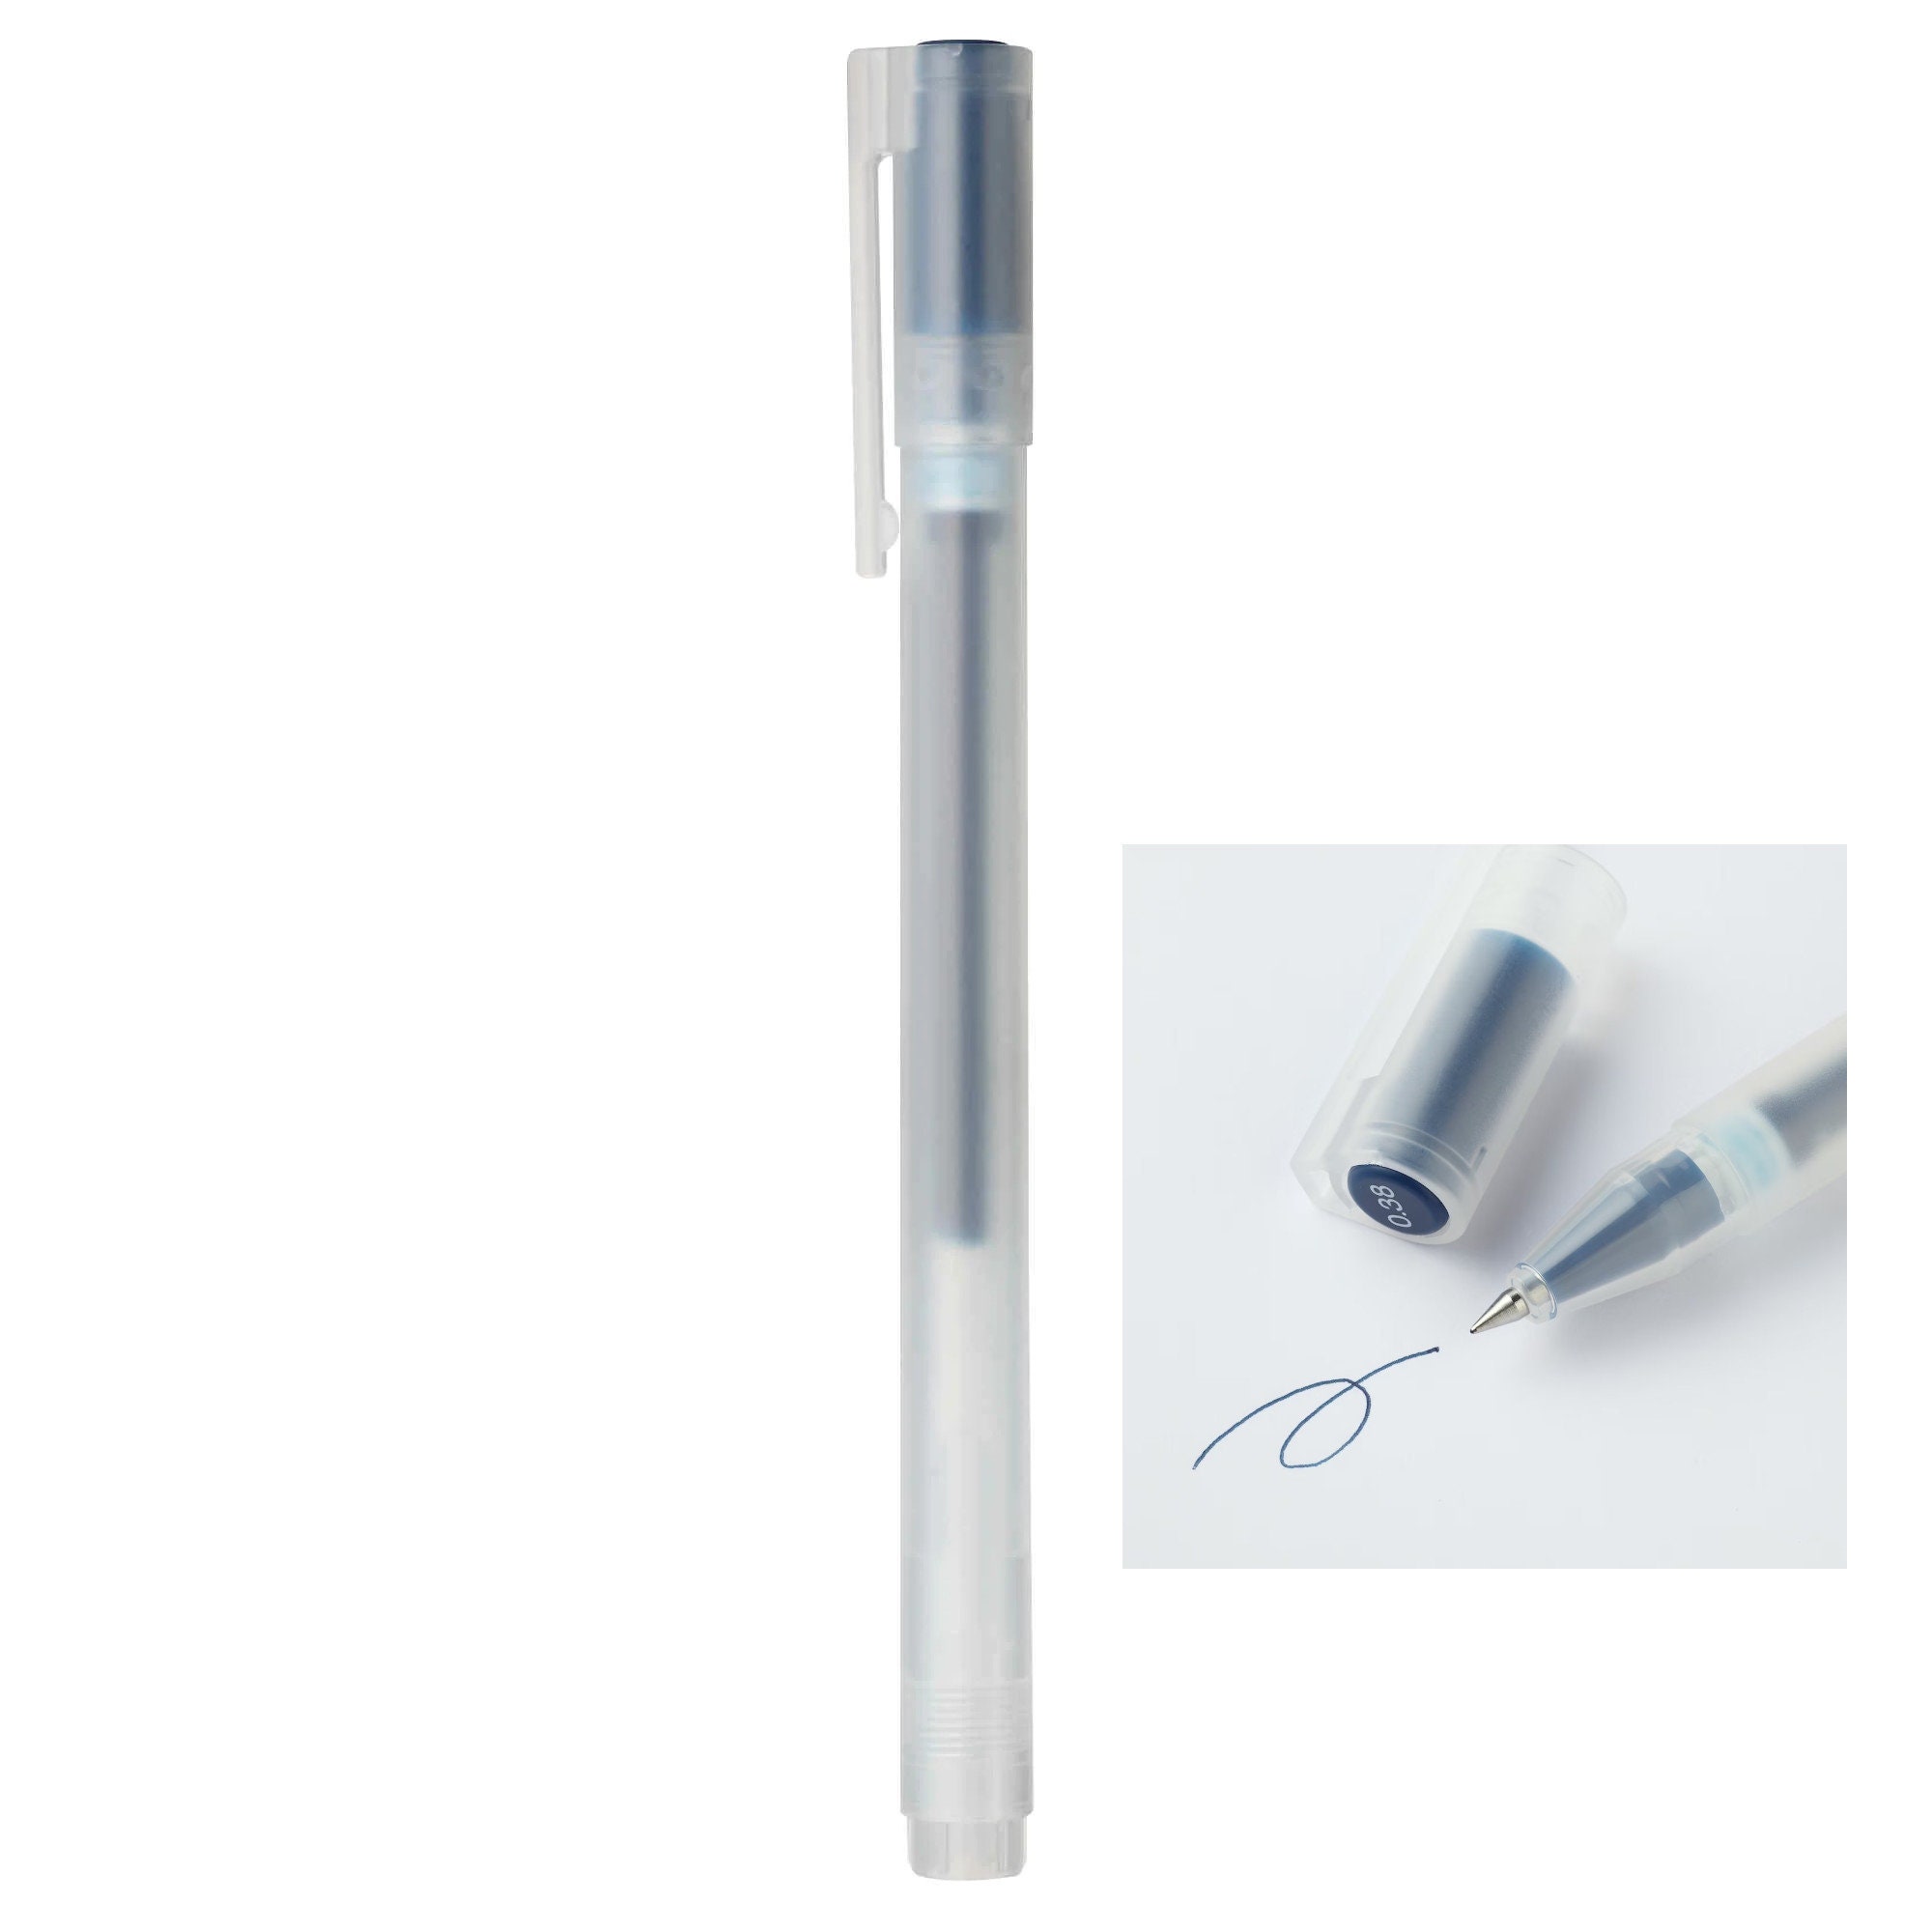 0.5mm Fine Tip Writing Pen with Black Gel Ink by Archer and Olive